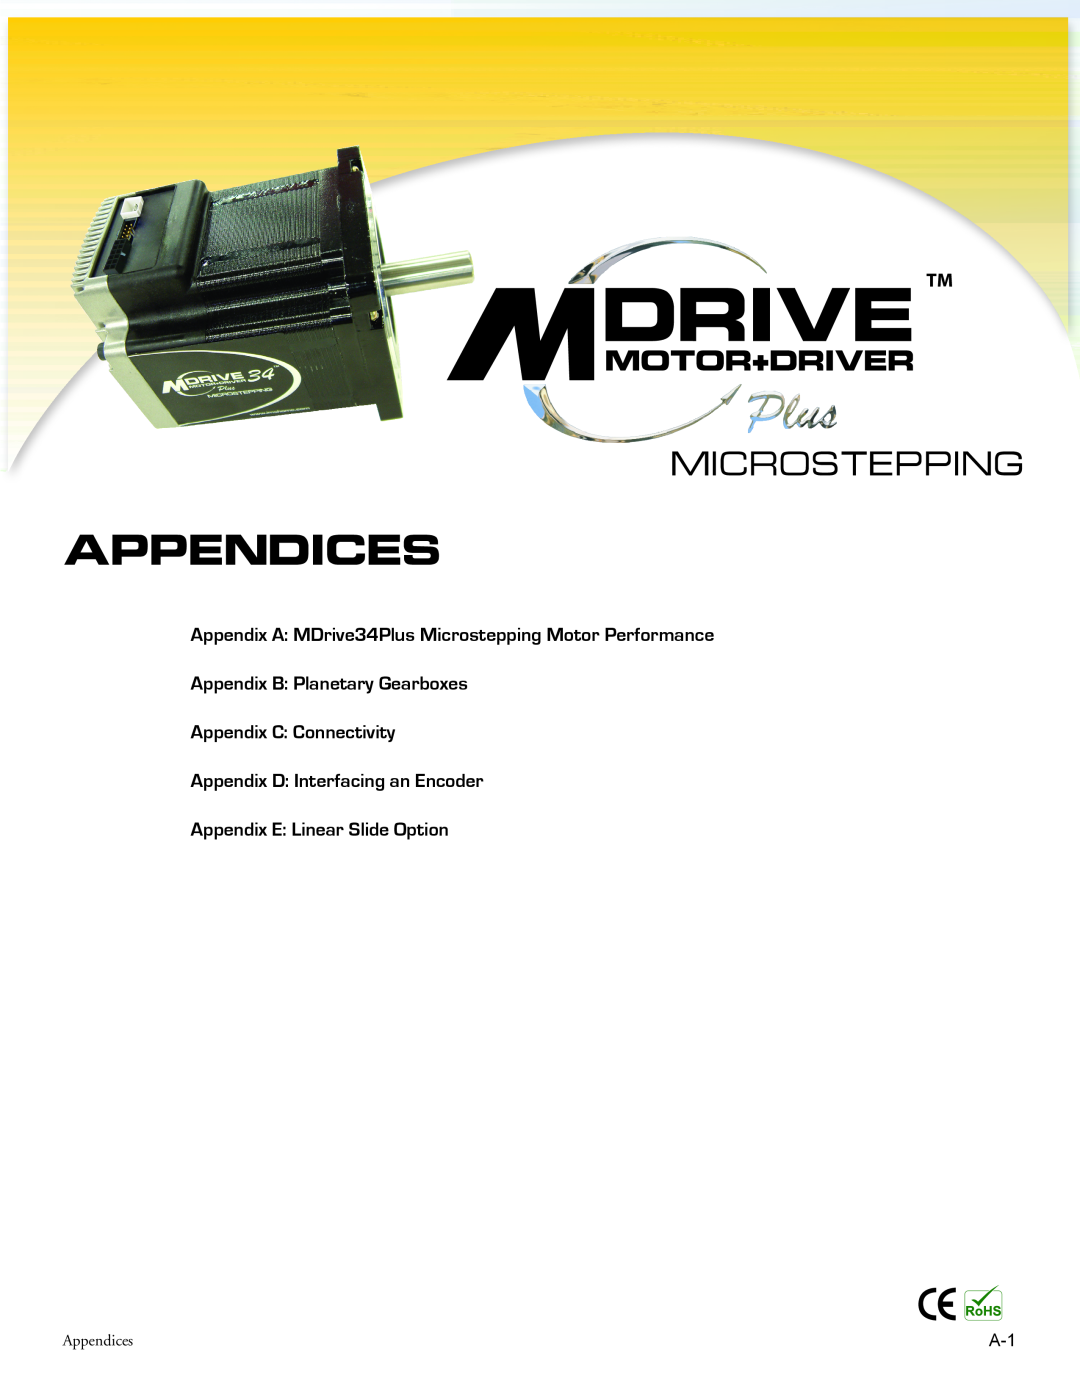 Intelligent Motion Systems MDrive34Plus Appendices, Appendix B Planetary Gearboxes, Appendix C Connectivity, Microstepping 